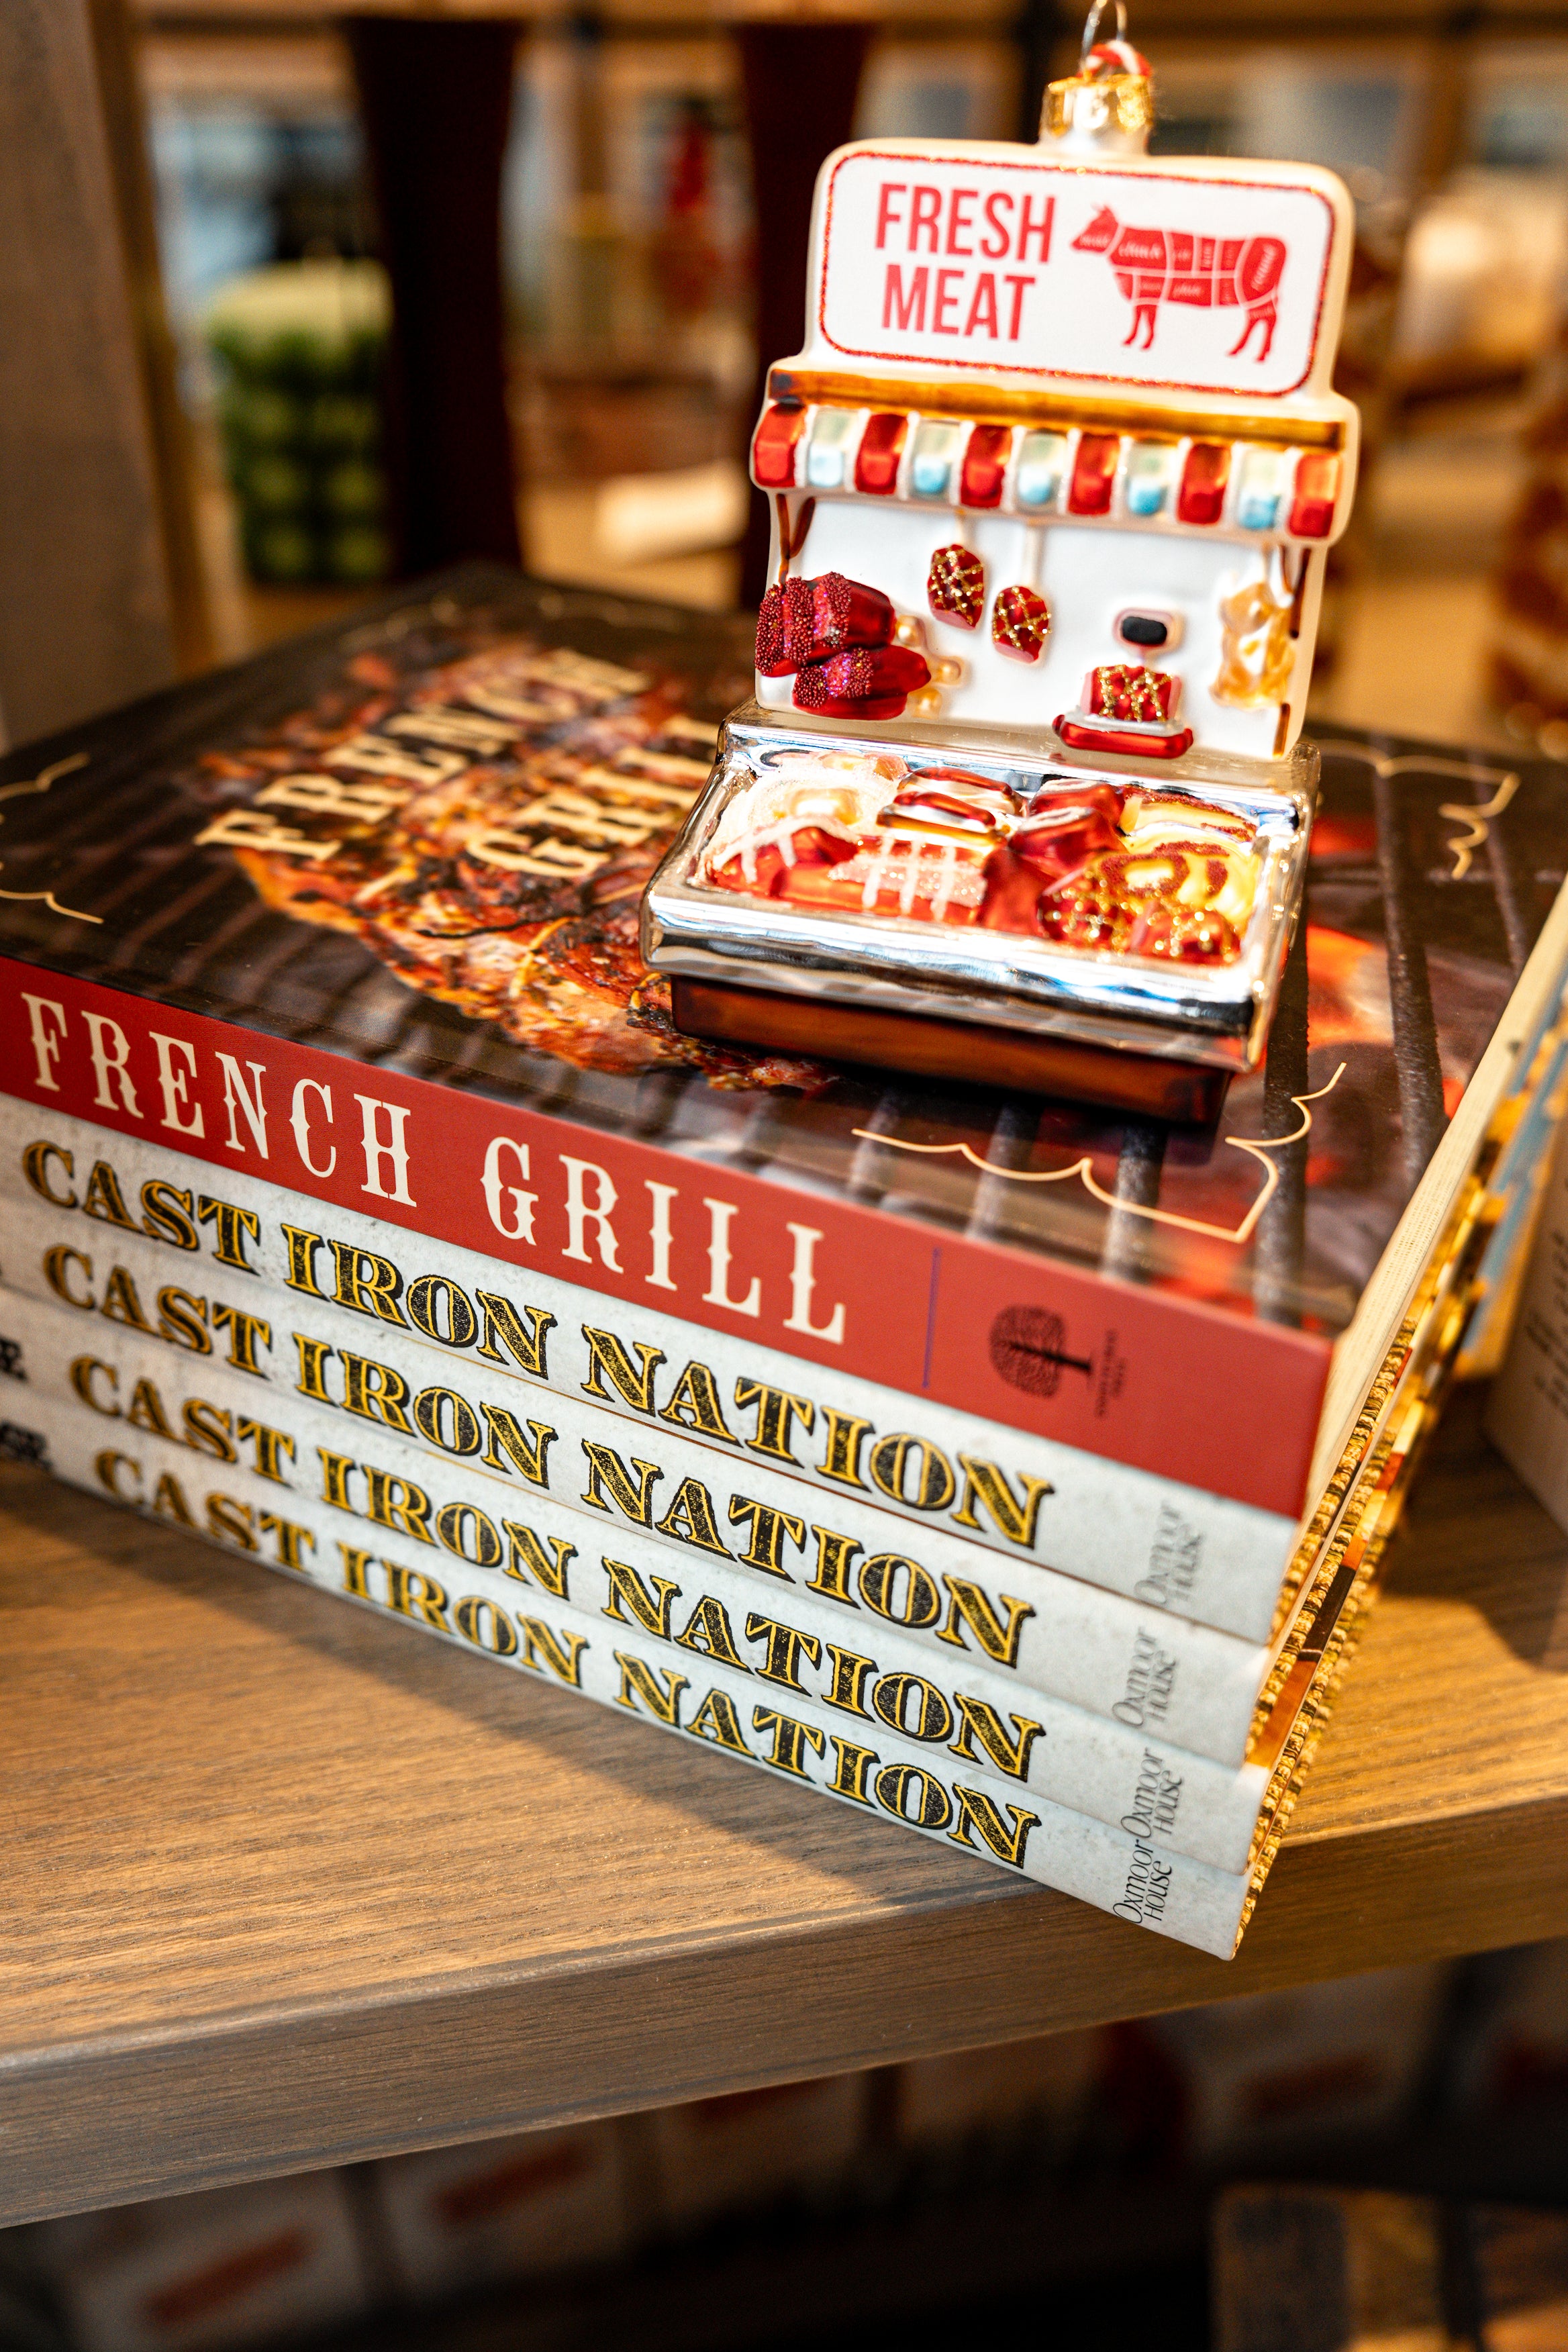 French Grill